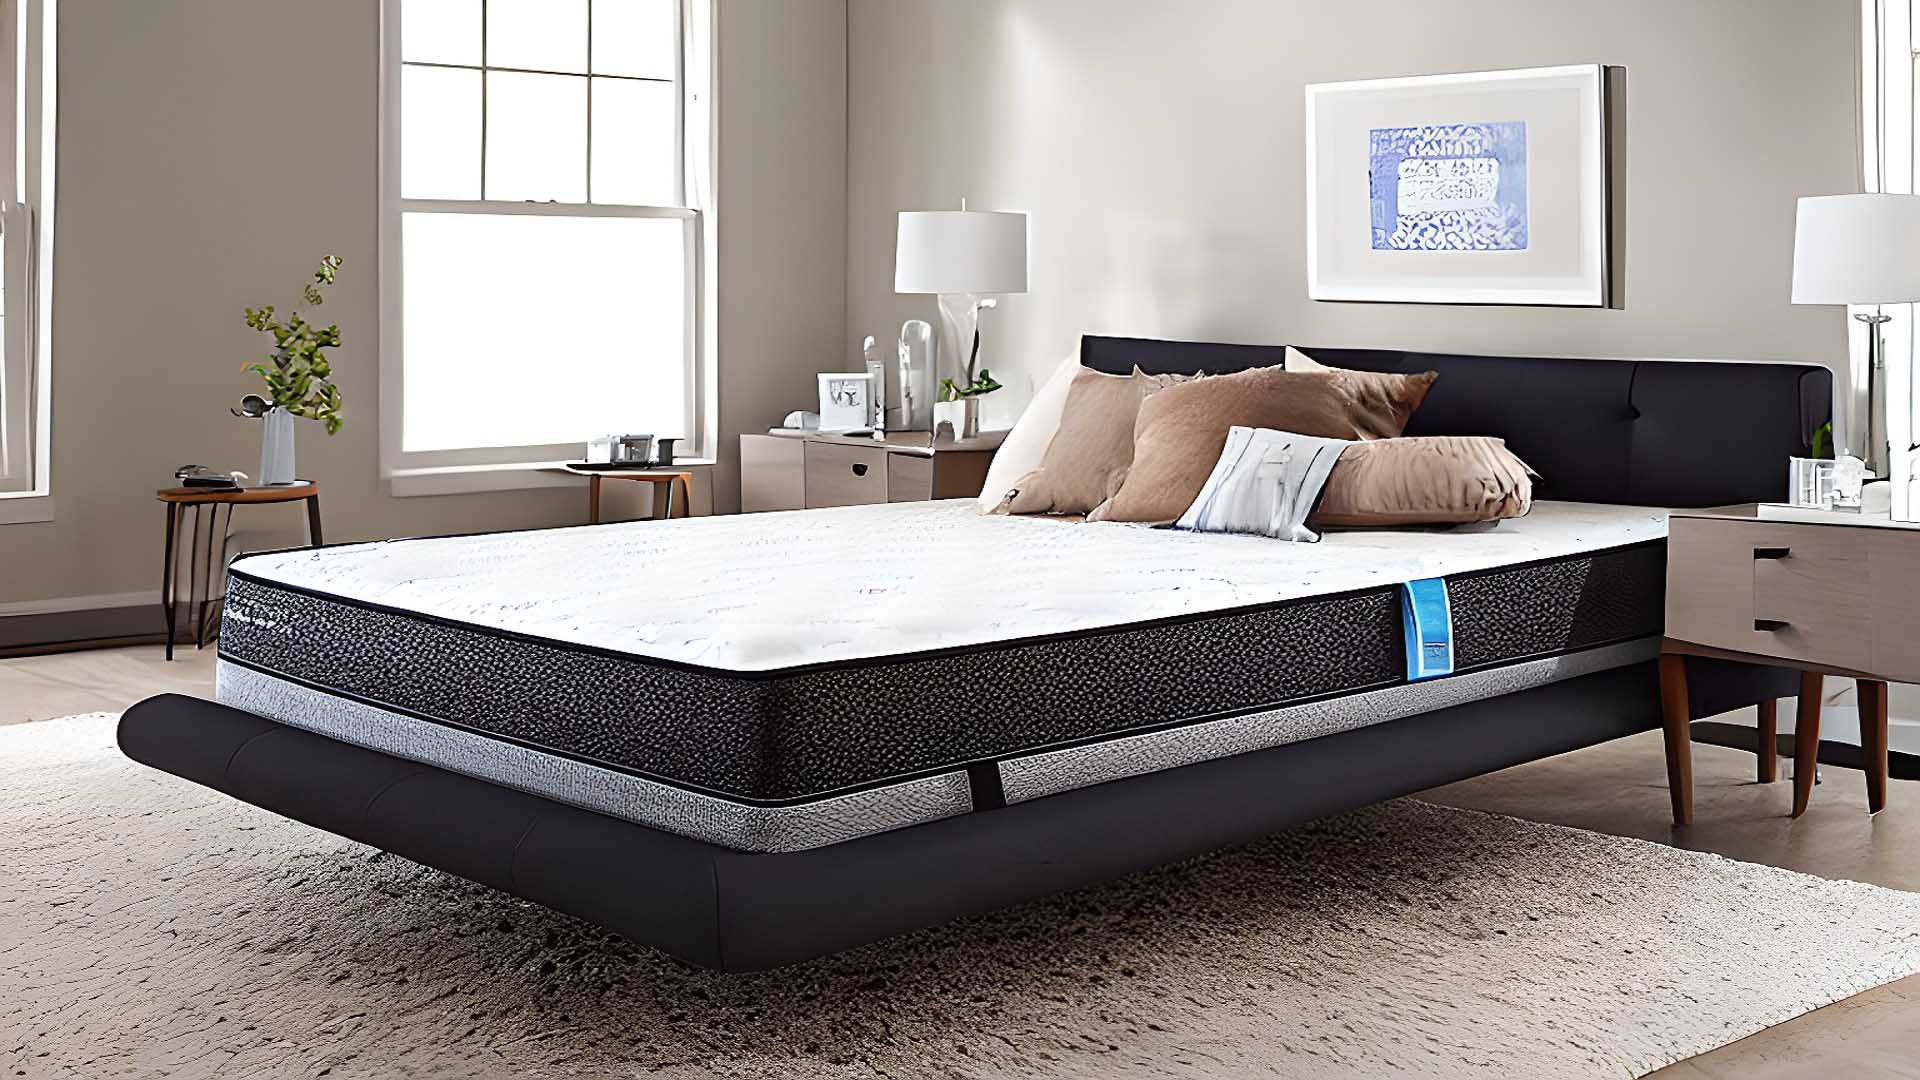 Mattress Sales & Deals in Canyon Country, CA